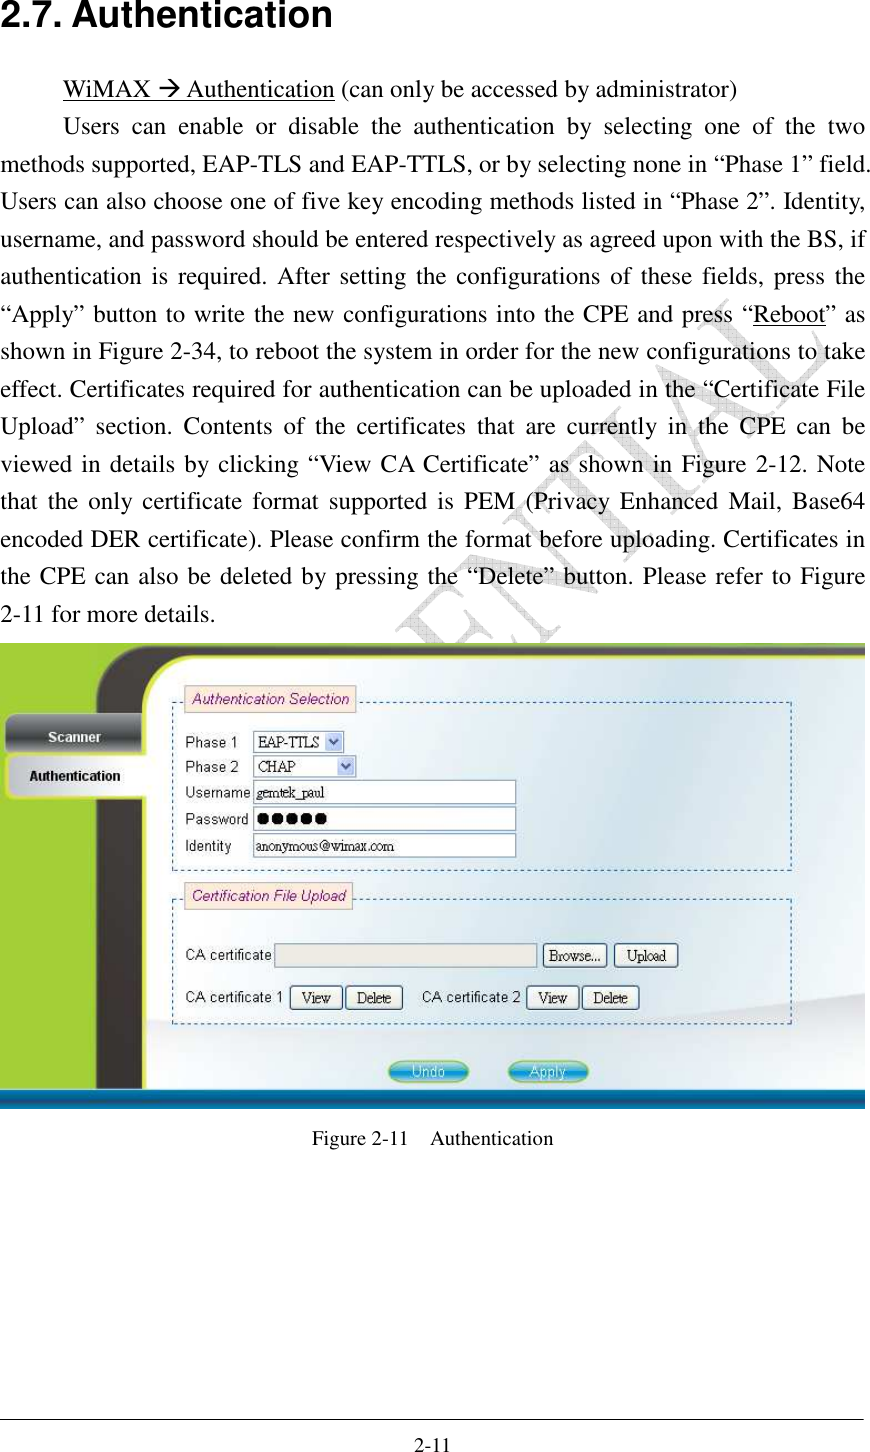    2-11 2.7. Authentication WiMAX  Authentication (can only be accessed by administrator) Users  can  enable  or  disable  the  authentication  by  selecting  one  of  the  two methods supported, EAP-TLS and EAP-TTLS, or by selecting none in “Phase 1” field. Users can also choose one of five key encoding methods listed in “Phase 2”. Identity, username, and password should be entered respectively as agreed upon with the BS, if authentication is required. After setting the configurations of these fields, press the “Apply” button to write the new configurations into the CPE and press “Reboot” as shown in Figure 2-34, to reboot the system in order for the new configurations to take effect. Certificates required for authentication can be uploaded in the “Certificate File Upload”  section.  Contents  of  the  certificates  that  are  currently  in  the  CPE  can  be viewed in details by clicking “View CA Certificate” as shown in Figure 2-12. Note that  the  only  certificate  format  supported  is  PEM  (Privacy  Enhanced  Mail, Base64 encoded DER certificate). Please confirm the format before uploading. Certificates in the CPE can also be deleted by pressing the “Delete” button. Please refer to Figure 2-11 for more details.    Figure 2-11    Authentication  